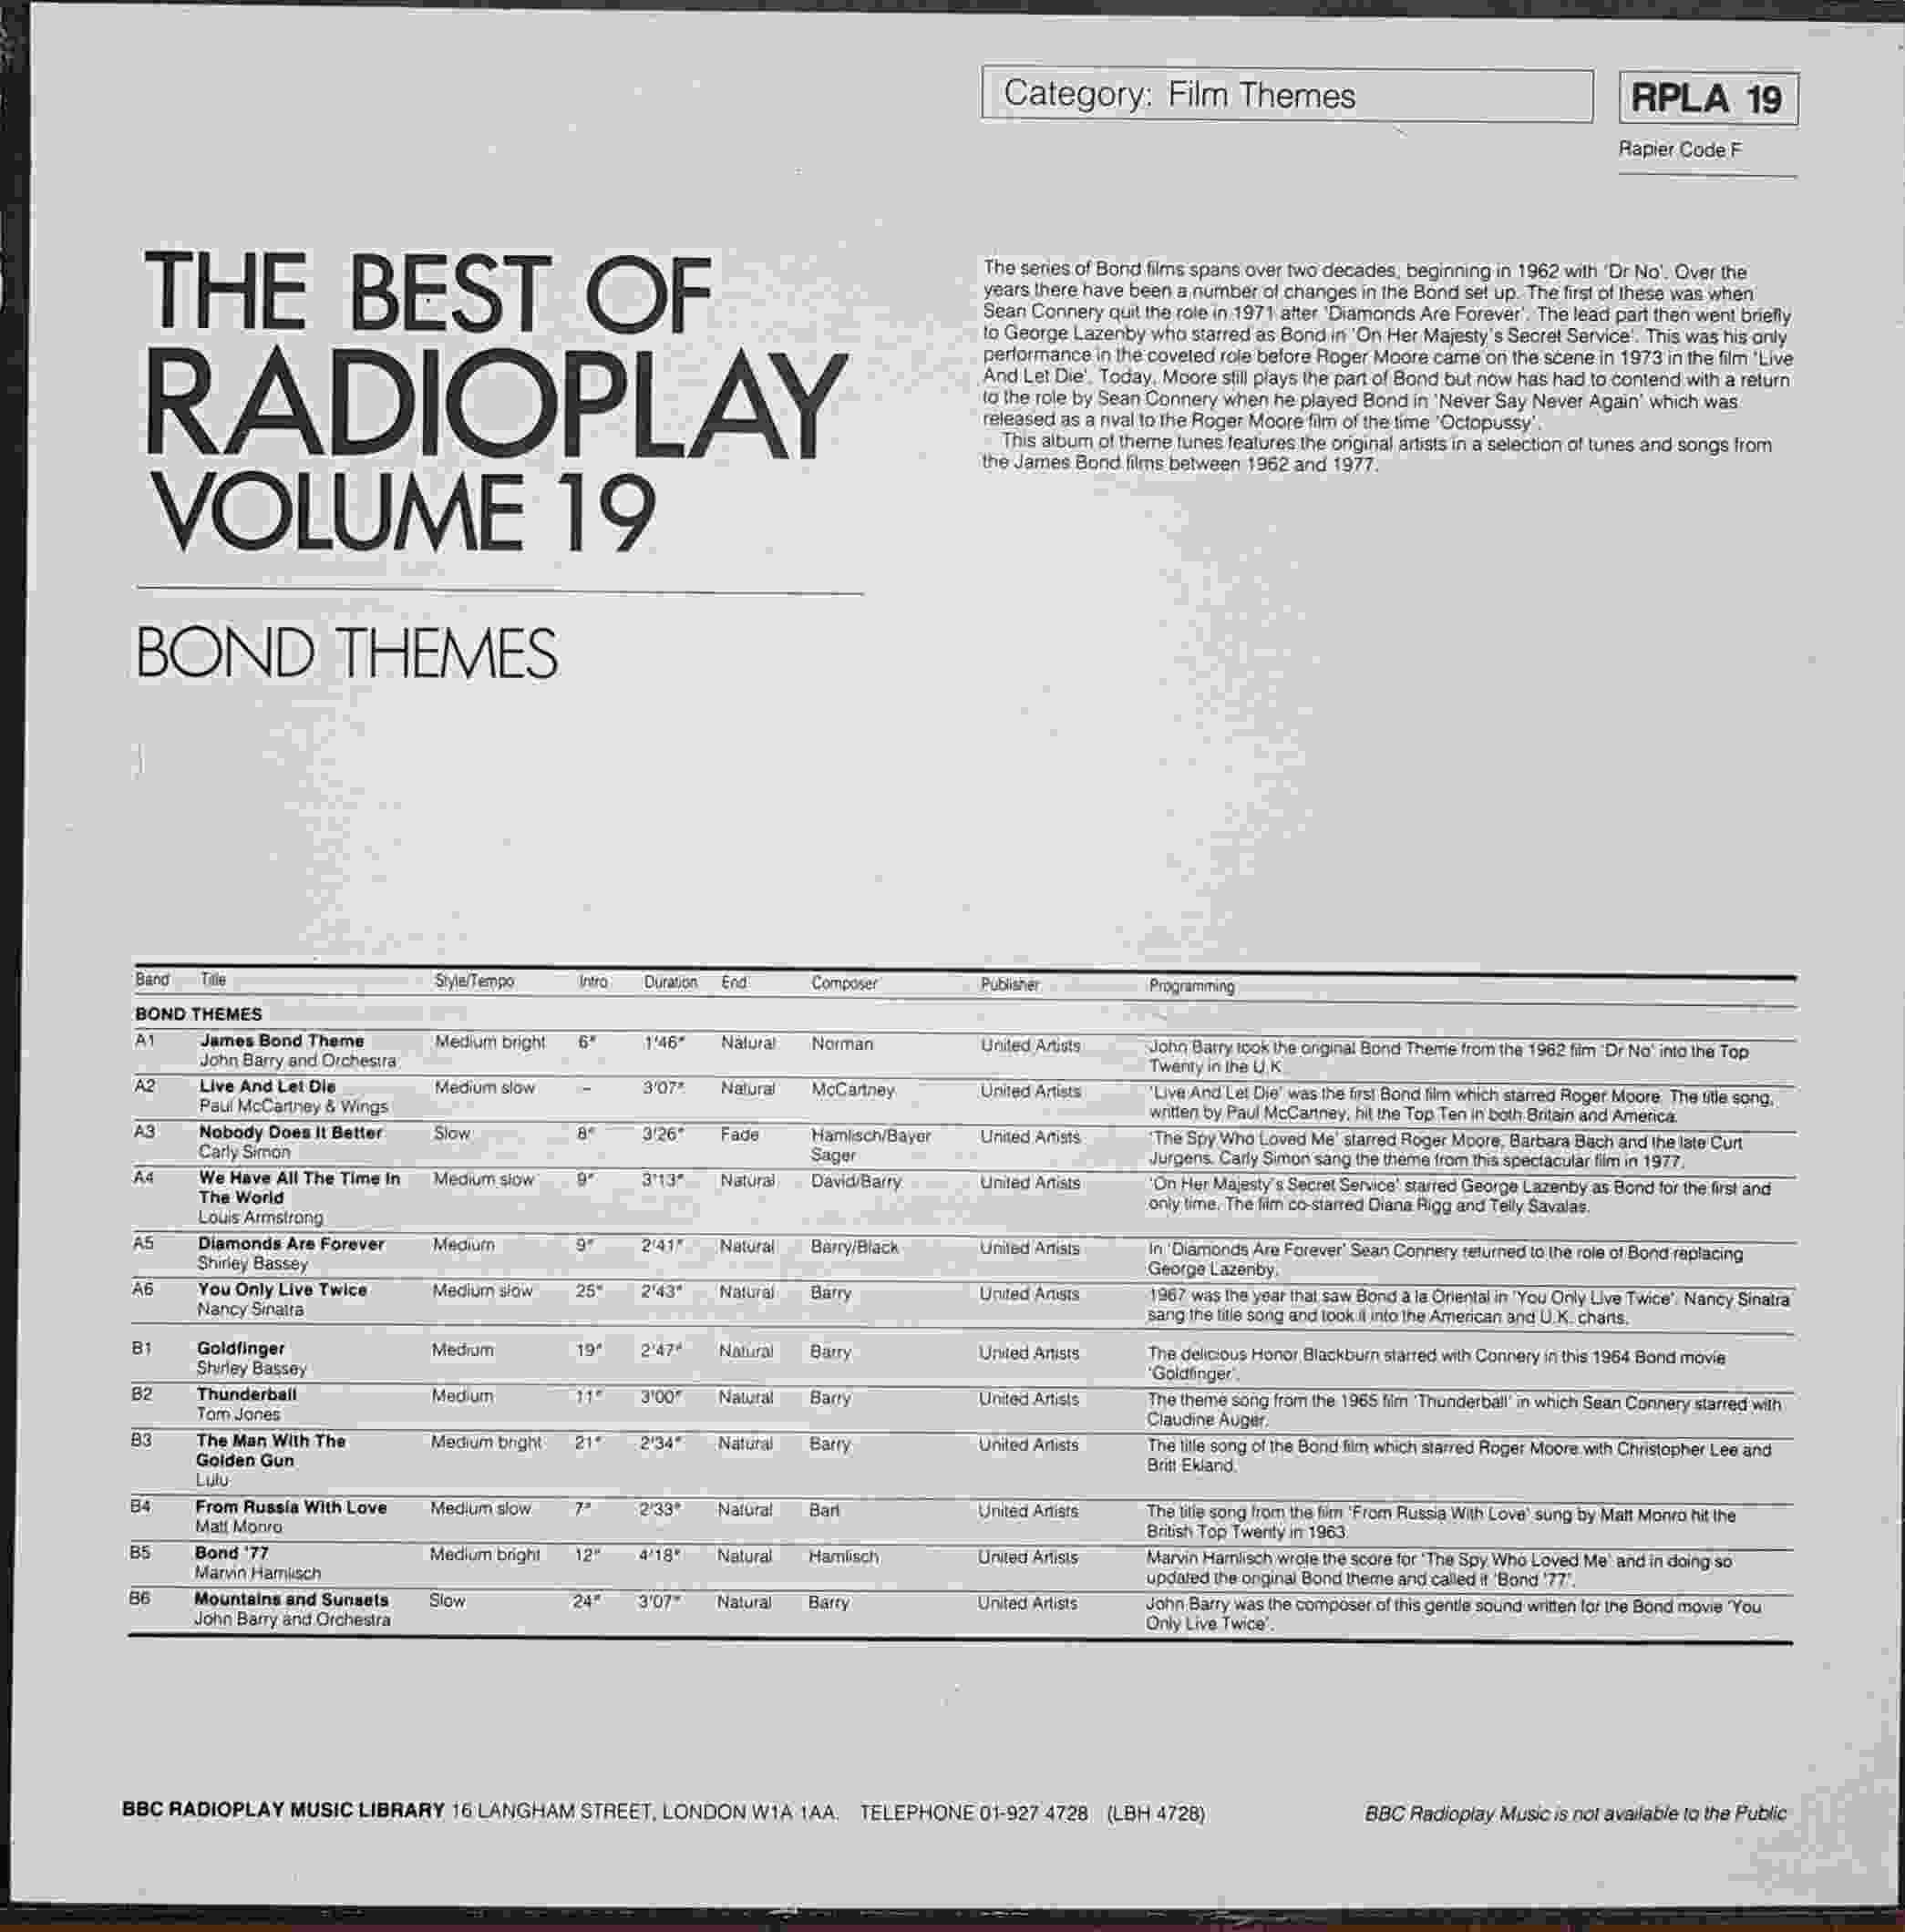 Picture of RPLA 19 The best of Radioplay - Volume 19 - Bond themes by artist Various from the BBC records and Tapes library